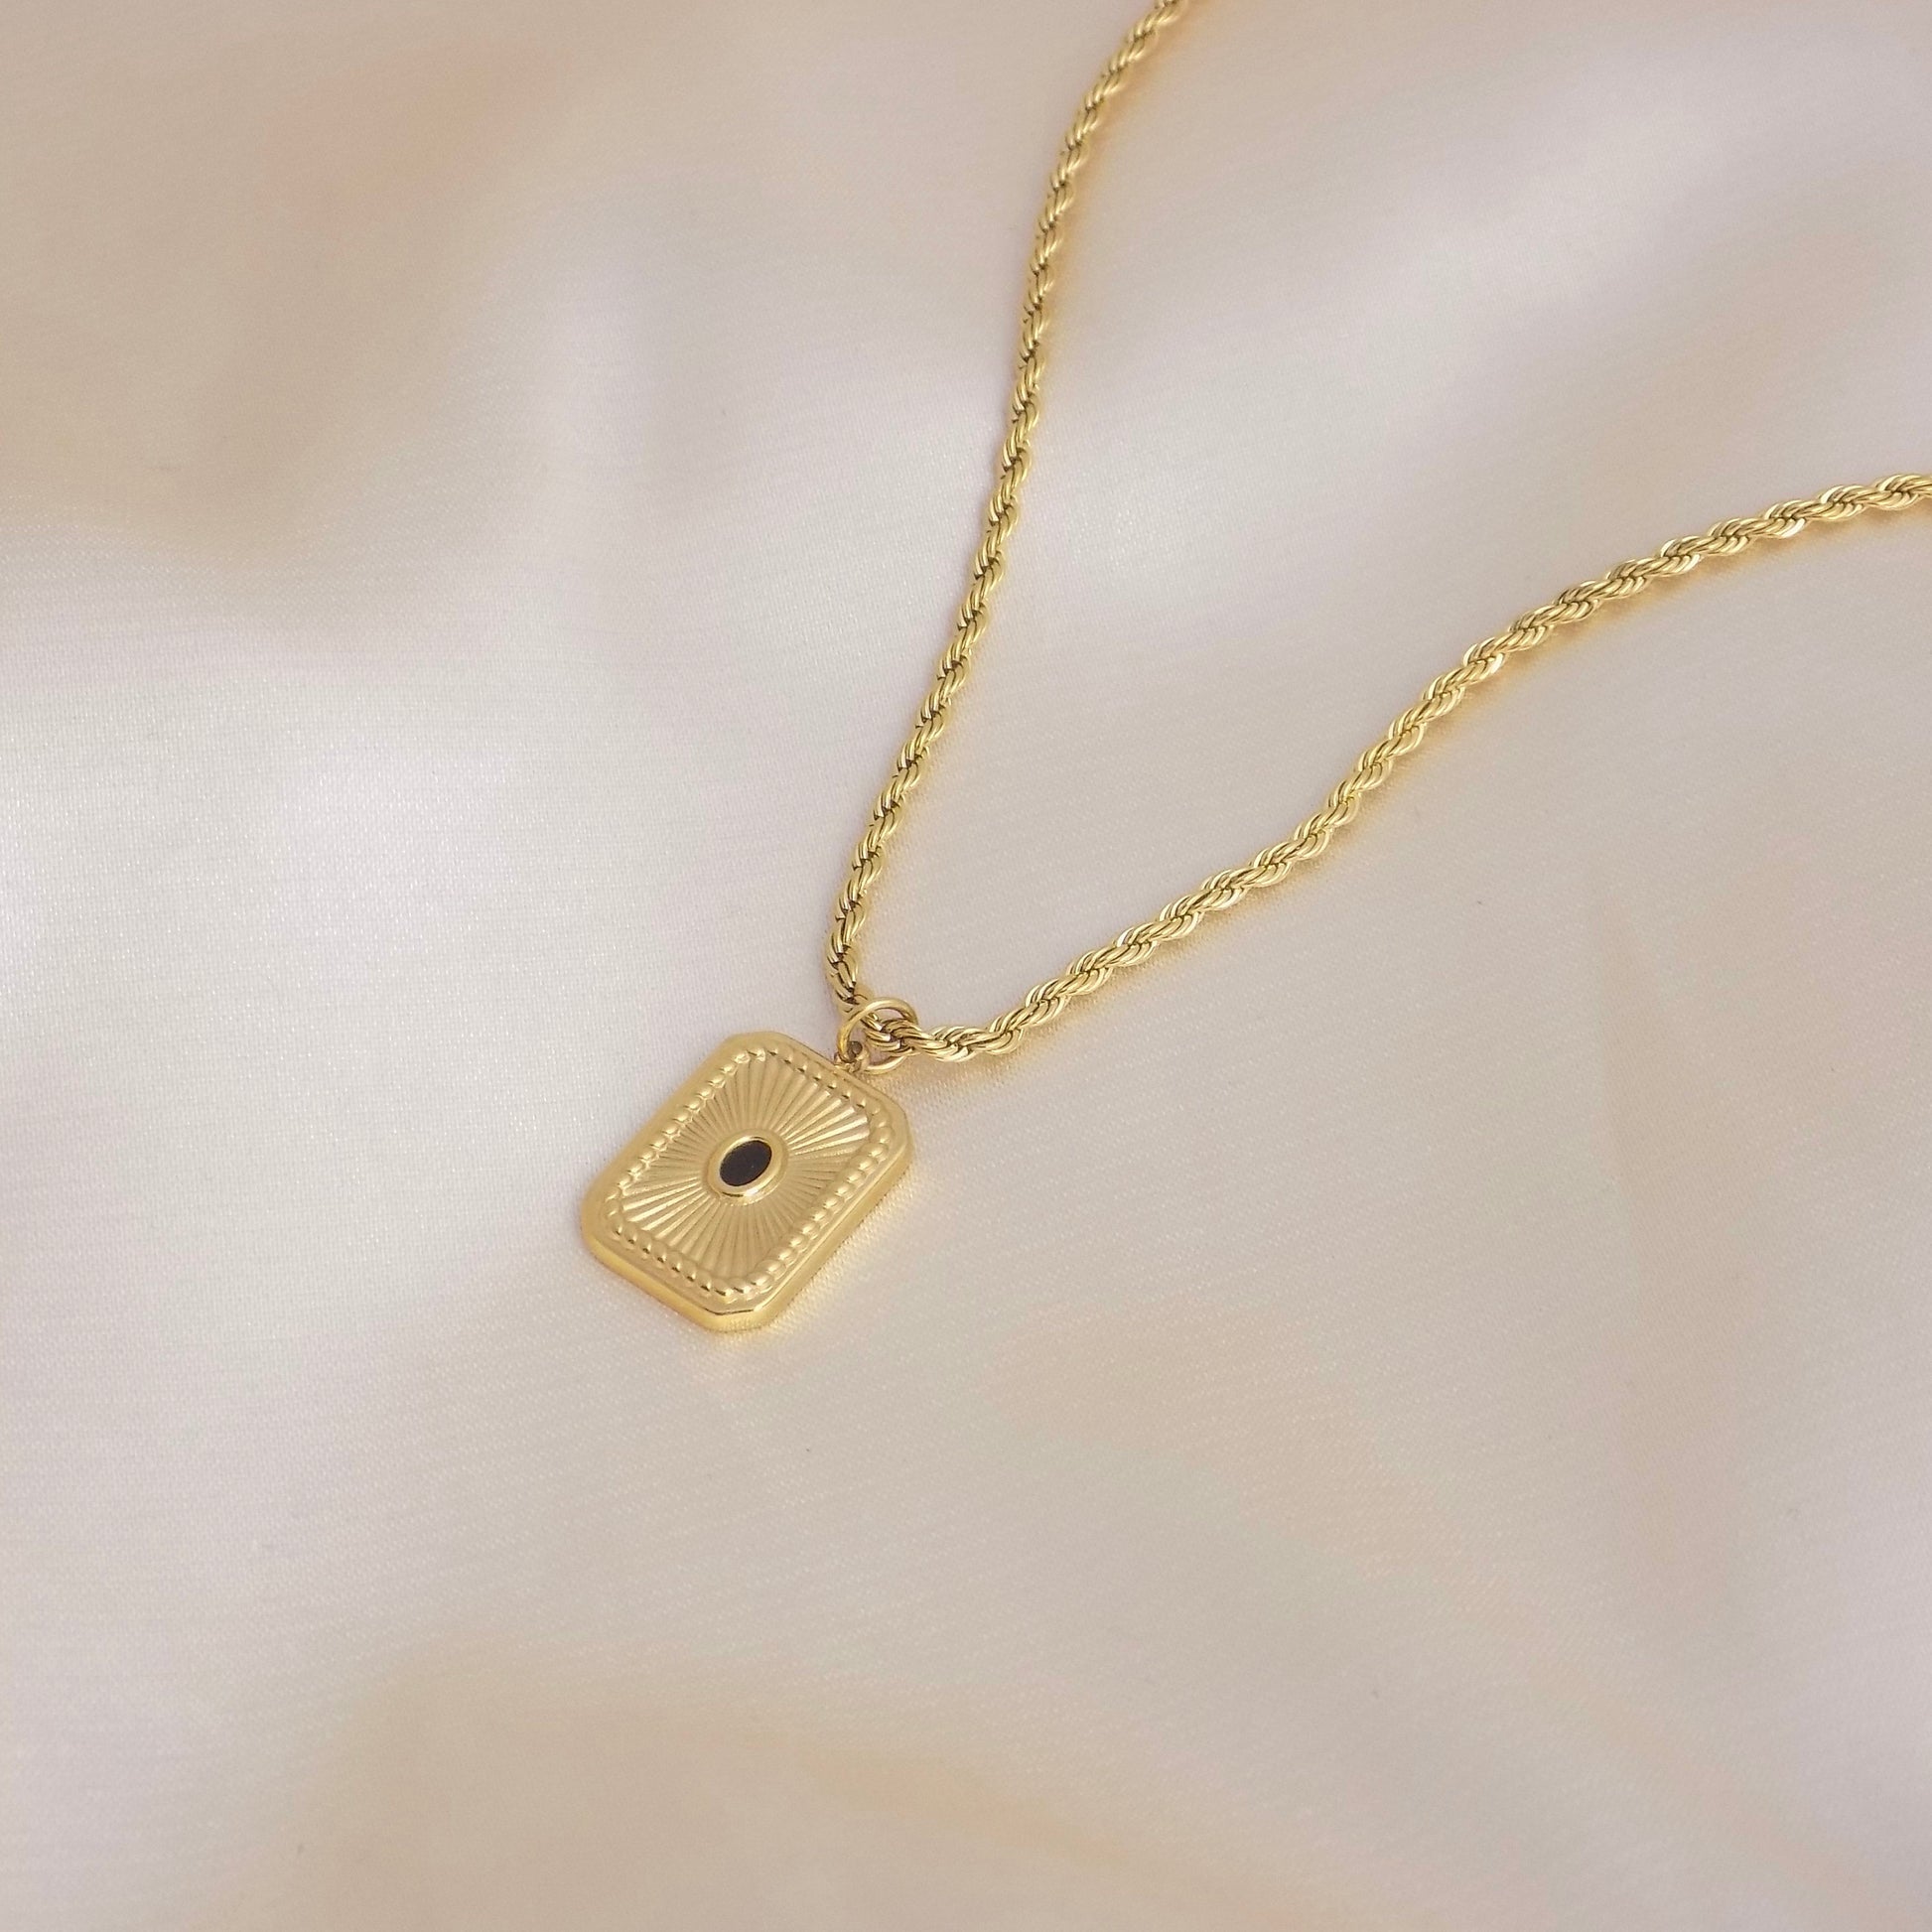 18K Gold Stainless Steel Tag Necklace on Rope Chain, Minimalist Trendy Layering Rectangle Charm, M6-115